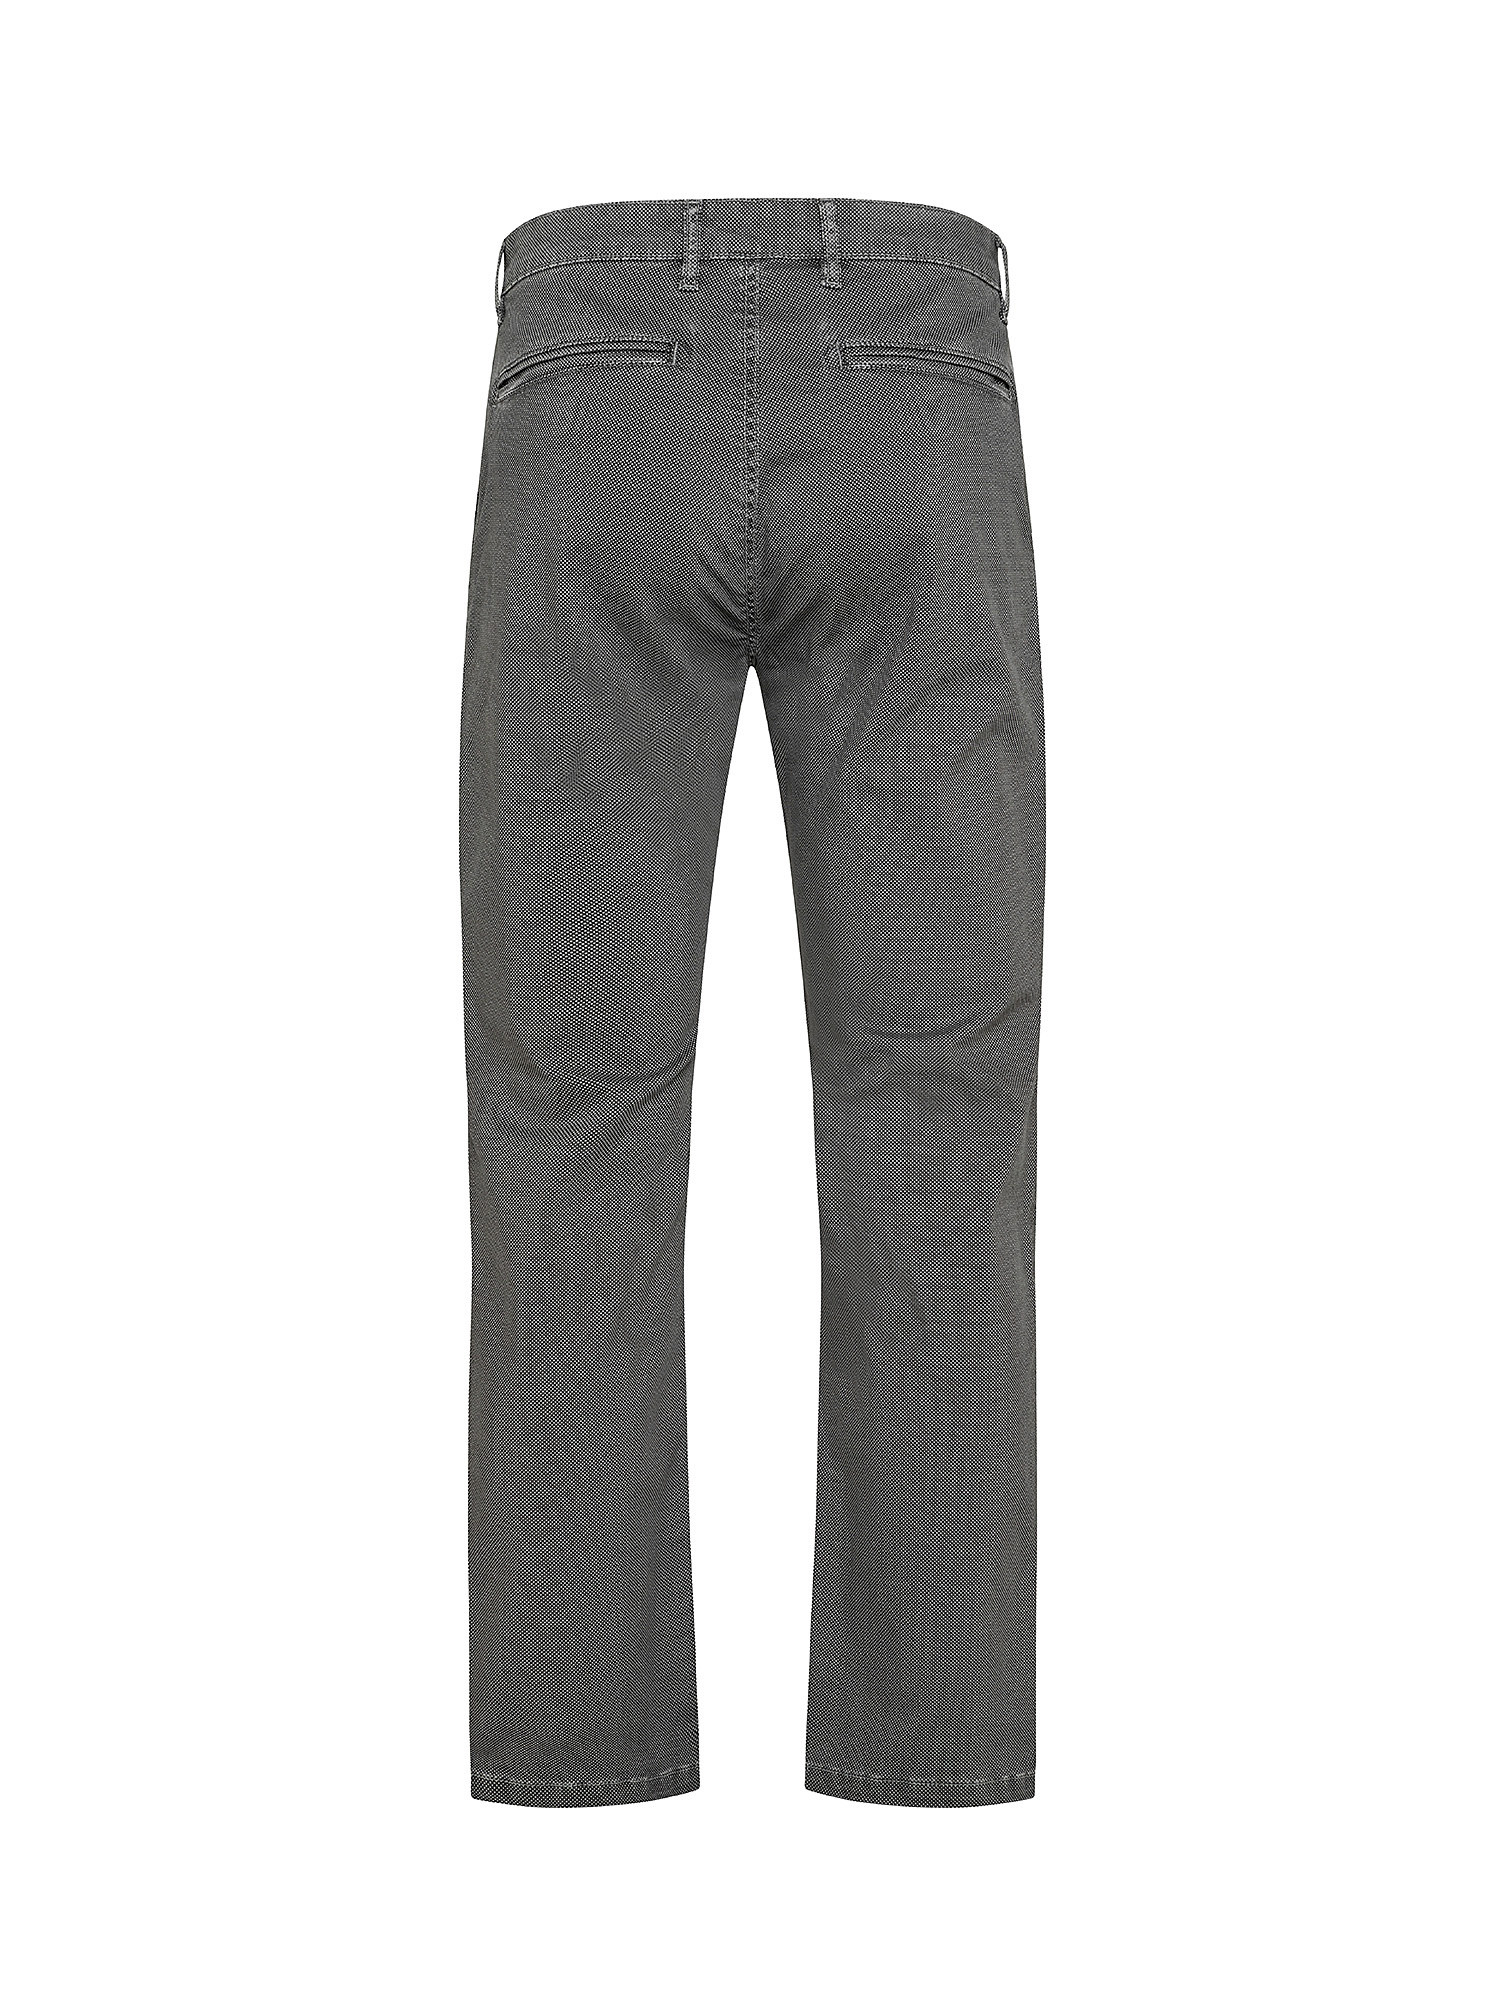 Pantalone chinos in cotone stretch, Grigio, large image number 1